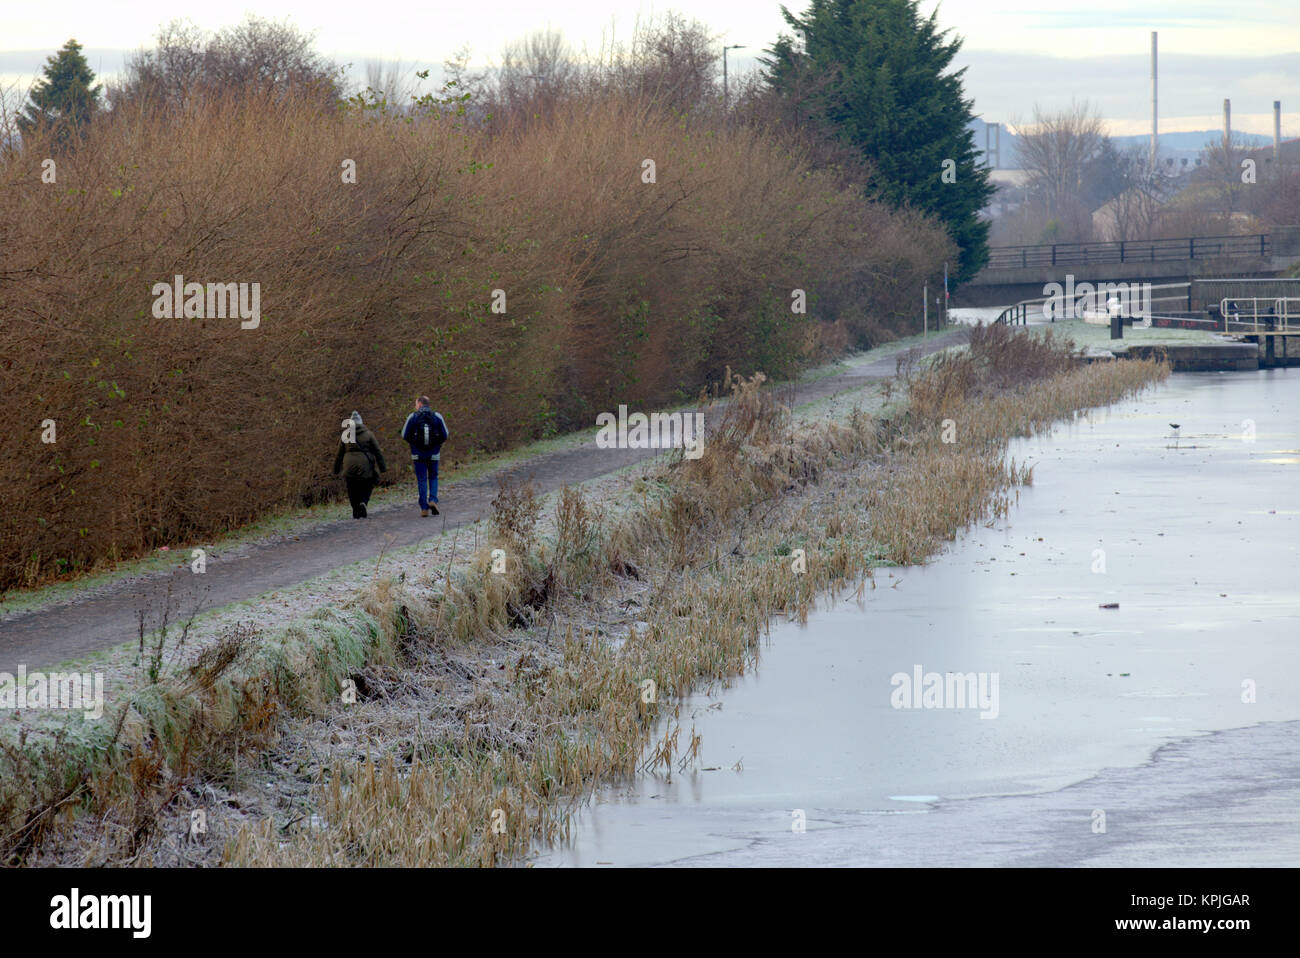 Glasgow, Scotland, UK 16th December. UK Weather: Freezing overnight temperatures cause the forth and Clyde canal to freeze over in parts. Credit: gerard ferry/Alamy Live News Stock Photo